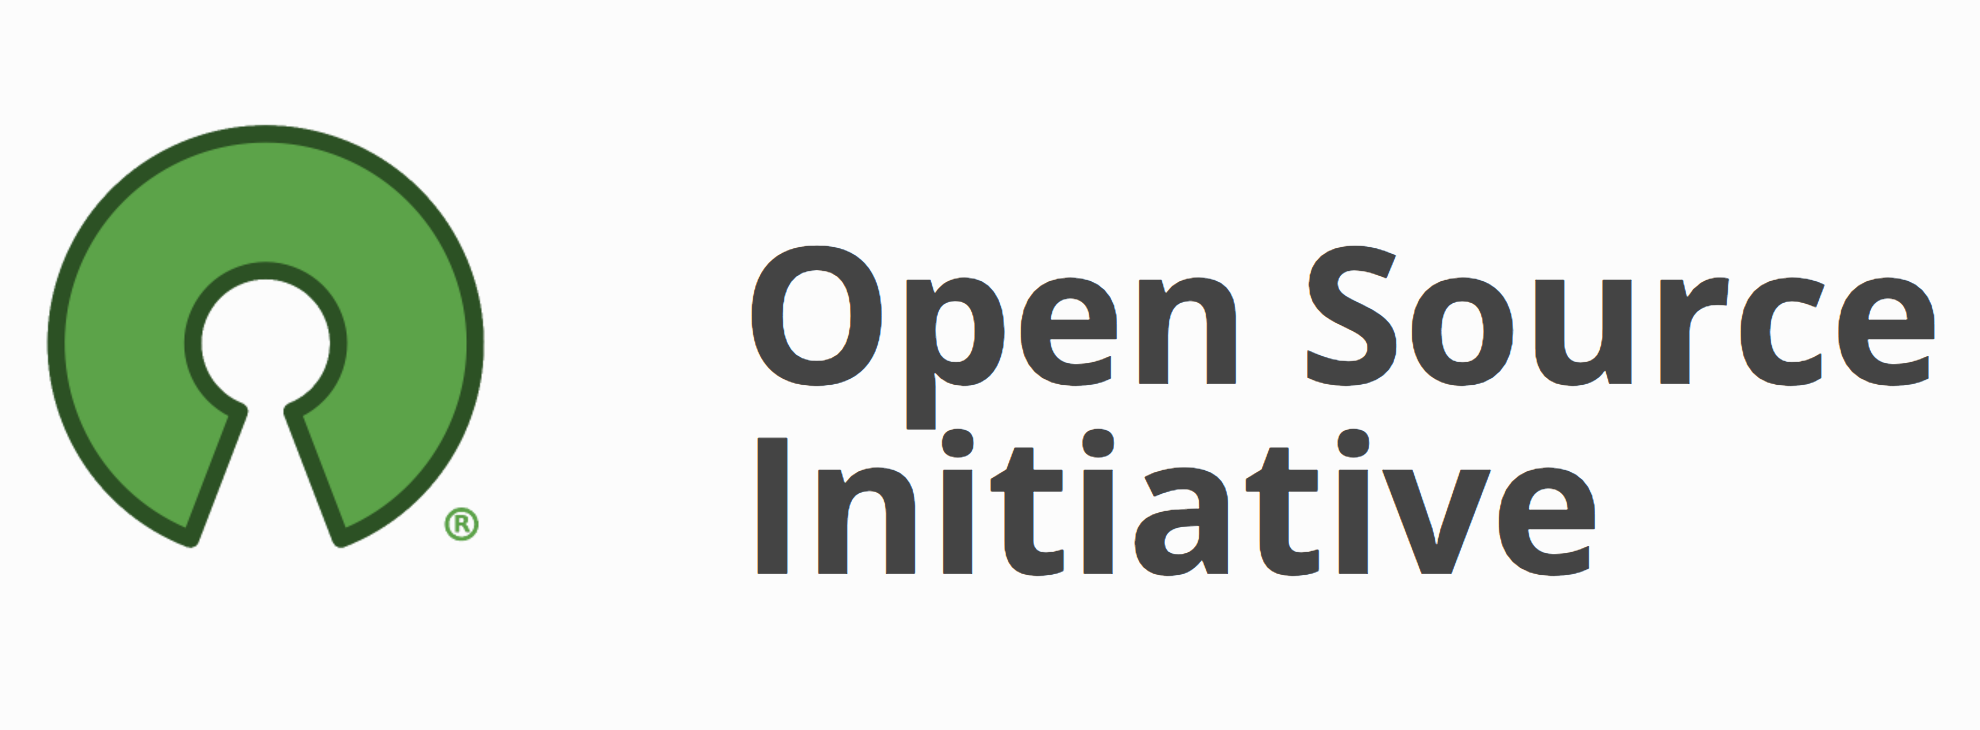 Open Source Initiative Calls Organizations to Reaffirm Support for Its Definition of Open Source